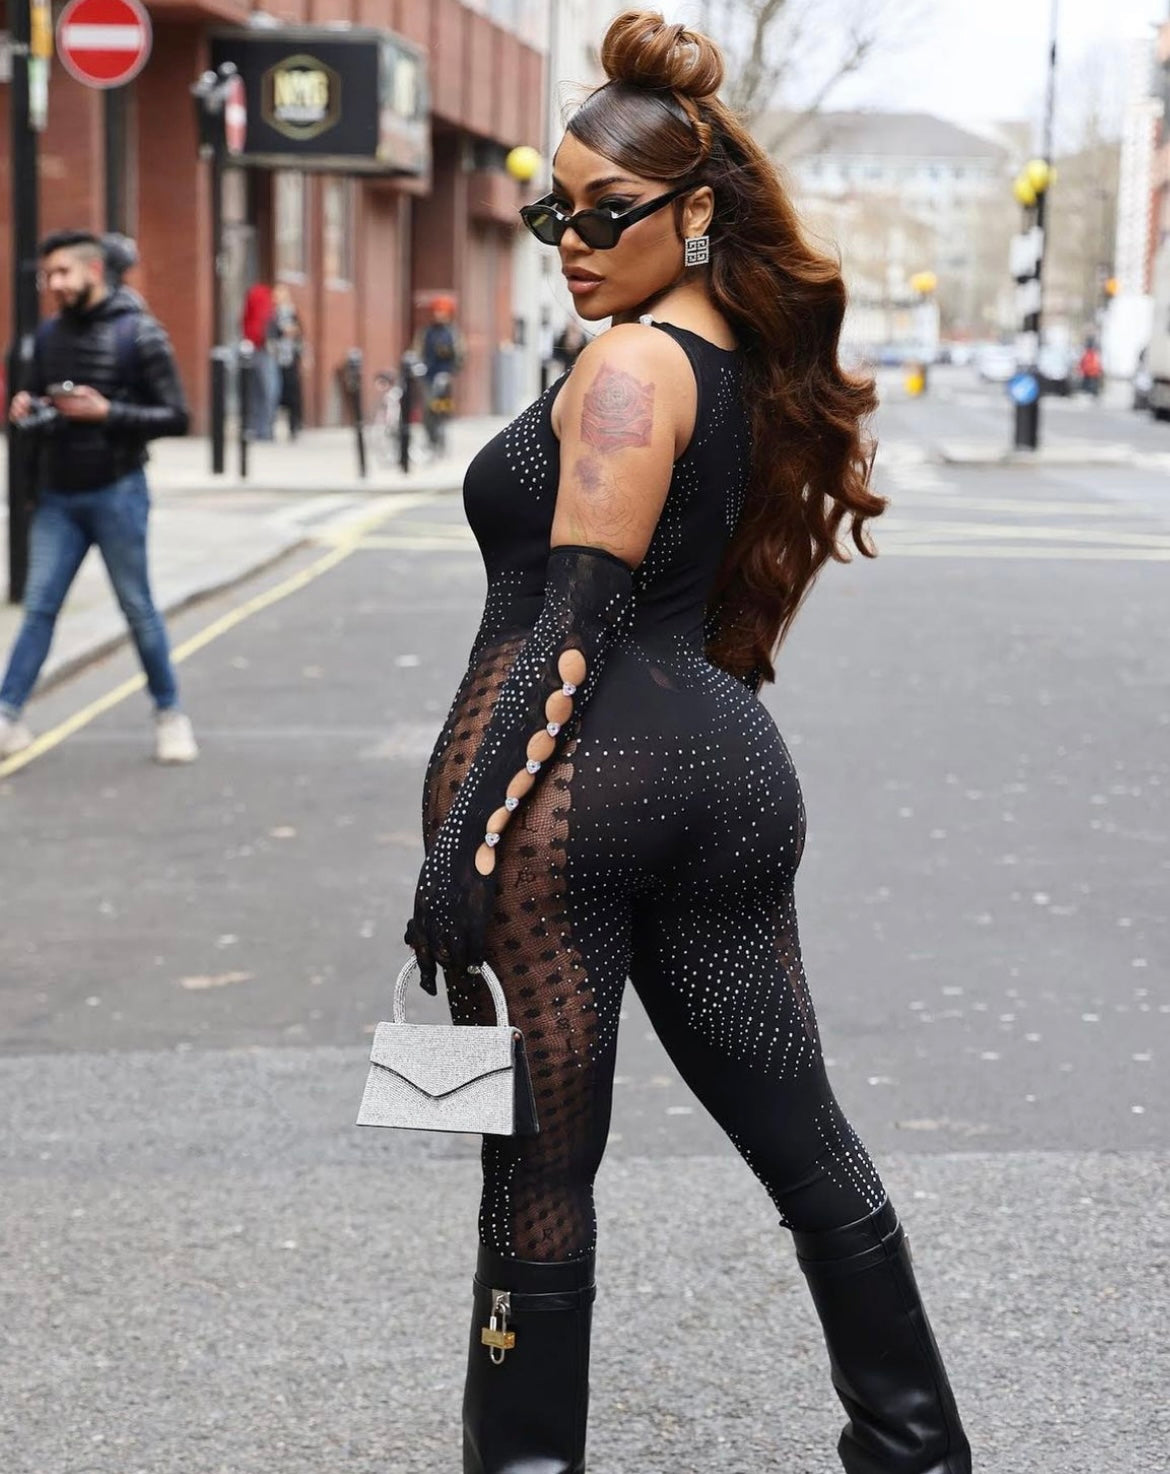 STEFFLON DON WEARS THE RHINESTONED JANICE JUMPSUIT AND GLOVES SET IN JET BLACK